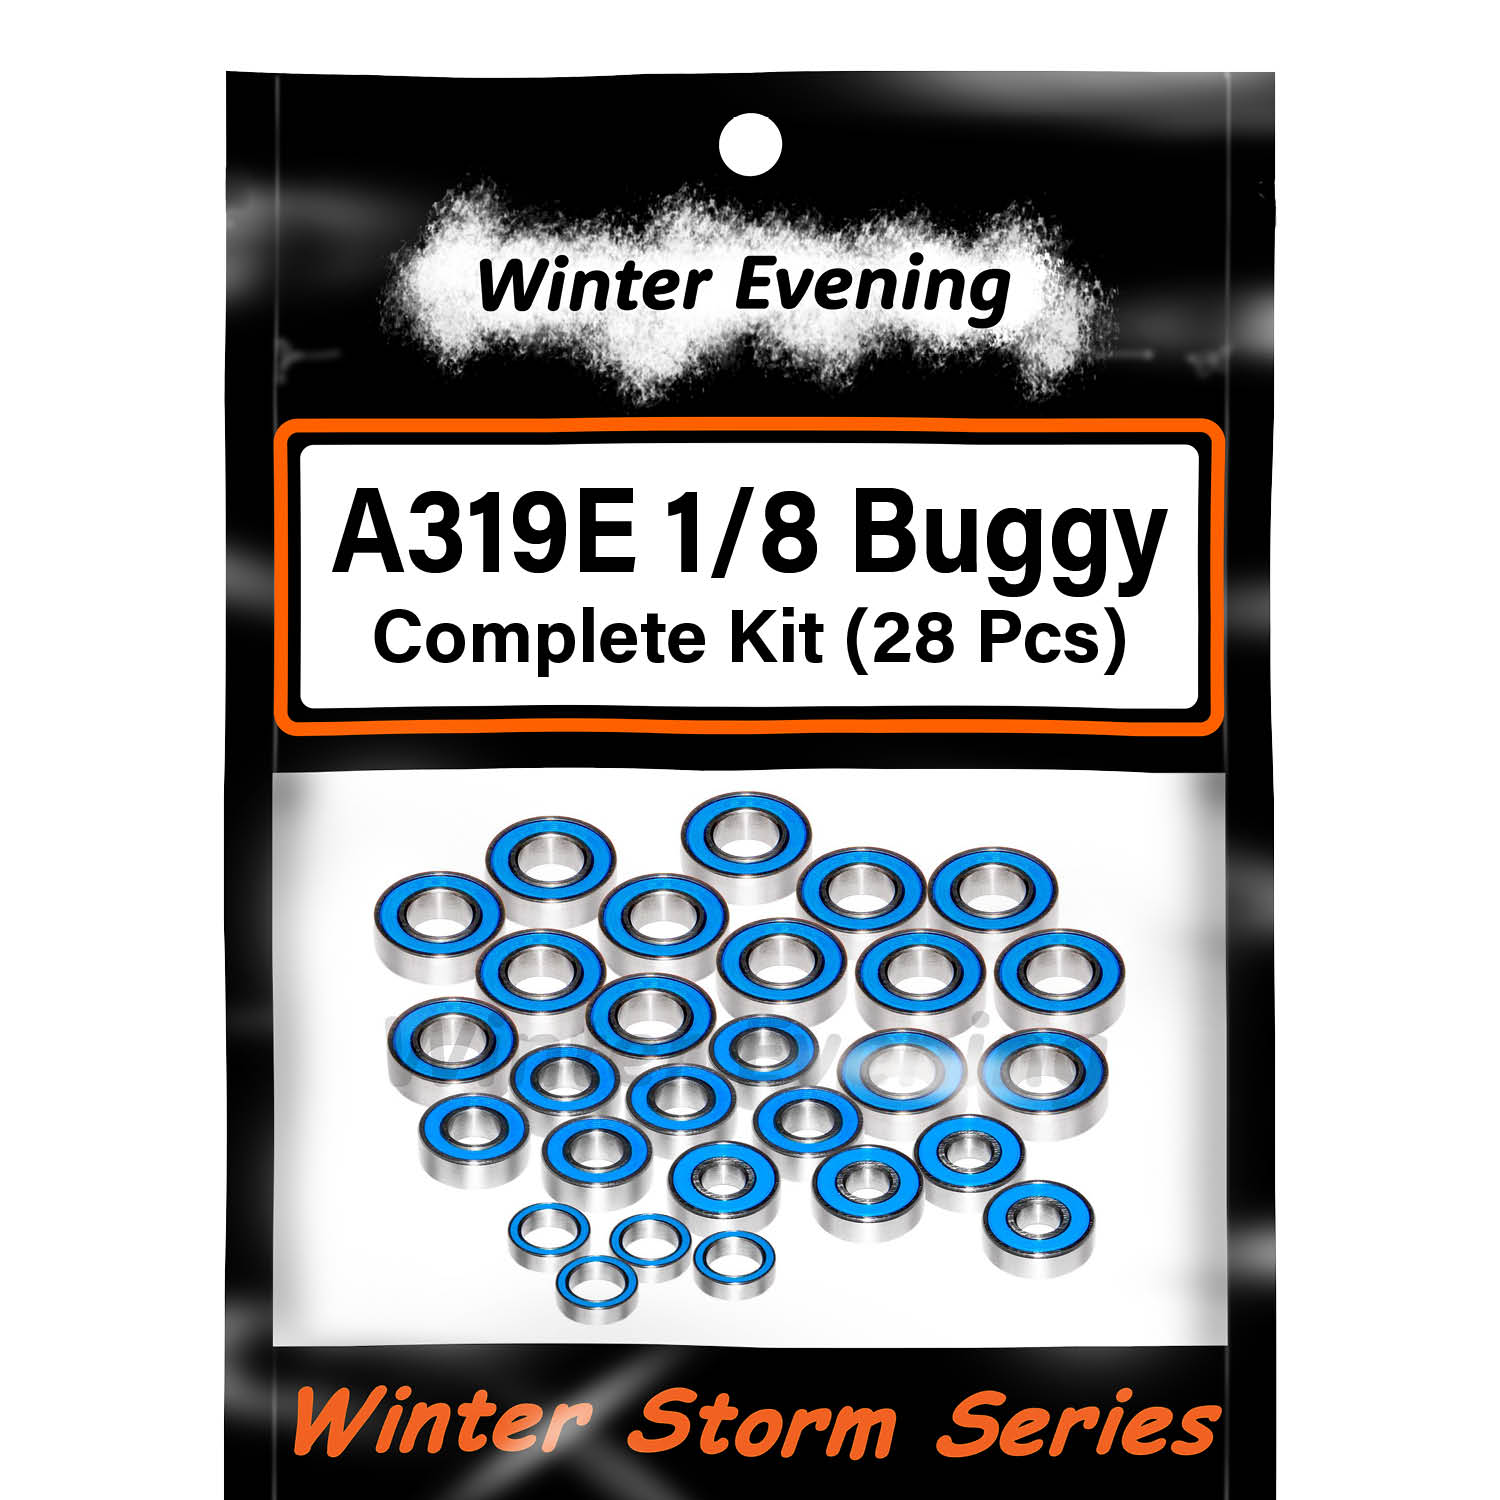 Winter Evening- for Agama Racing A319E 1/8 Buggy (28 Pcs Bearings Kit)